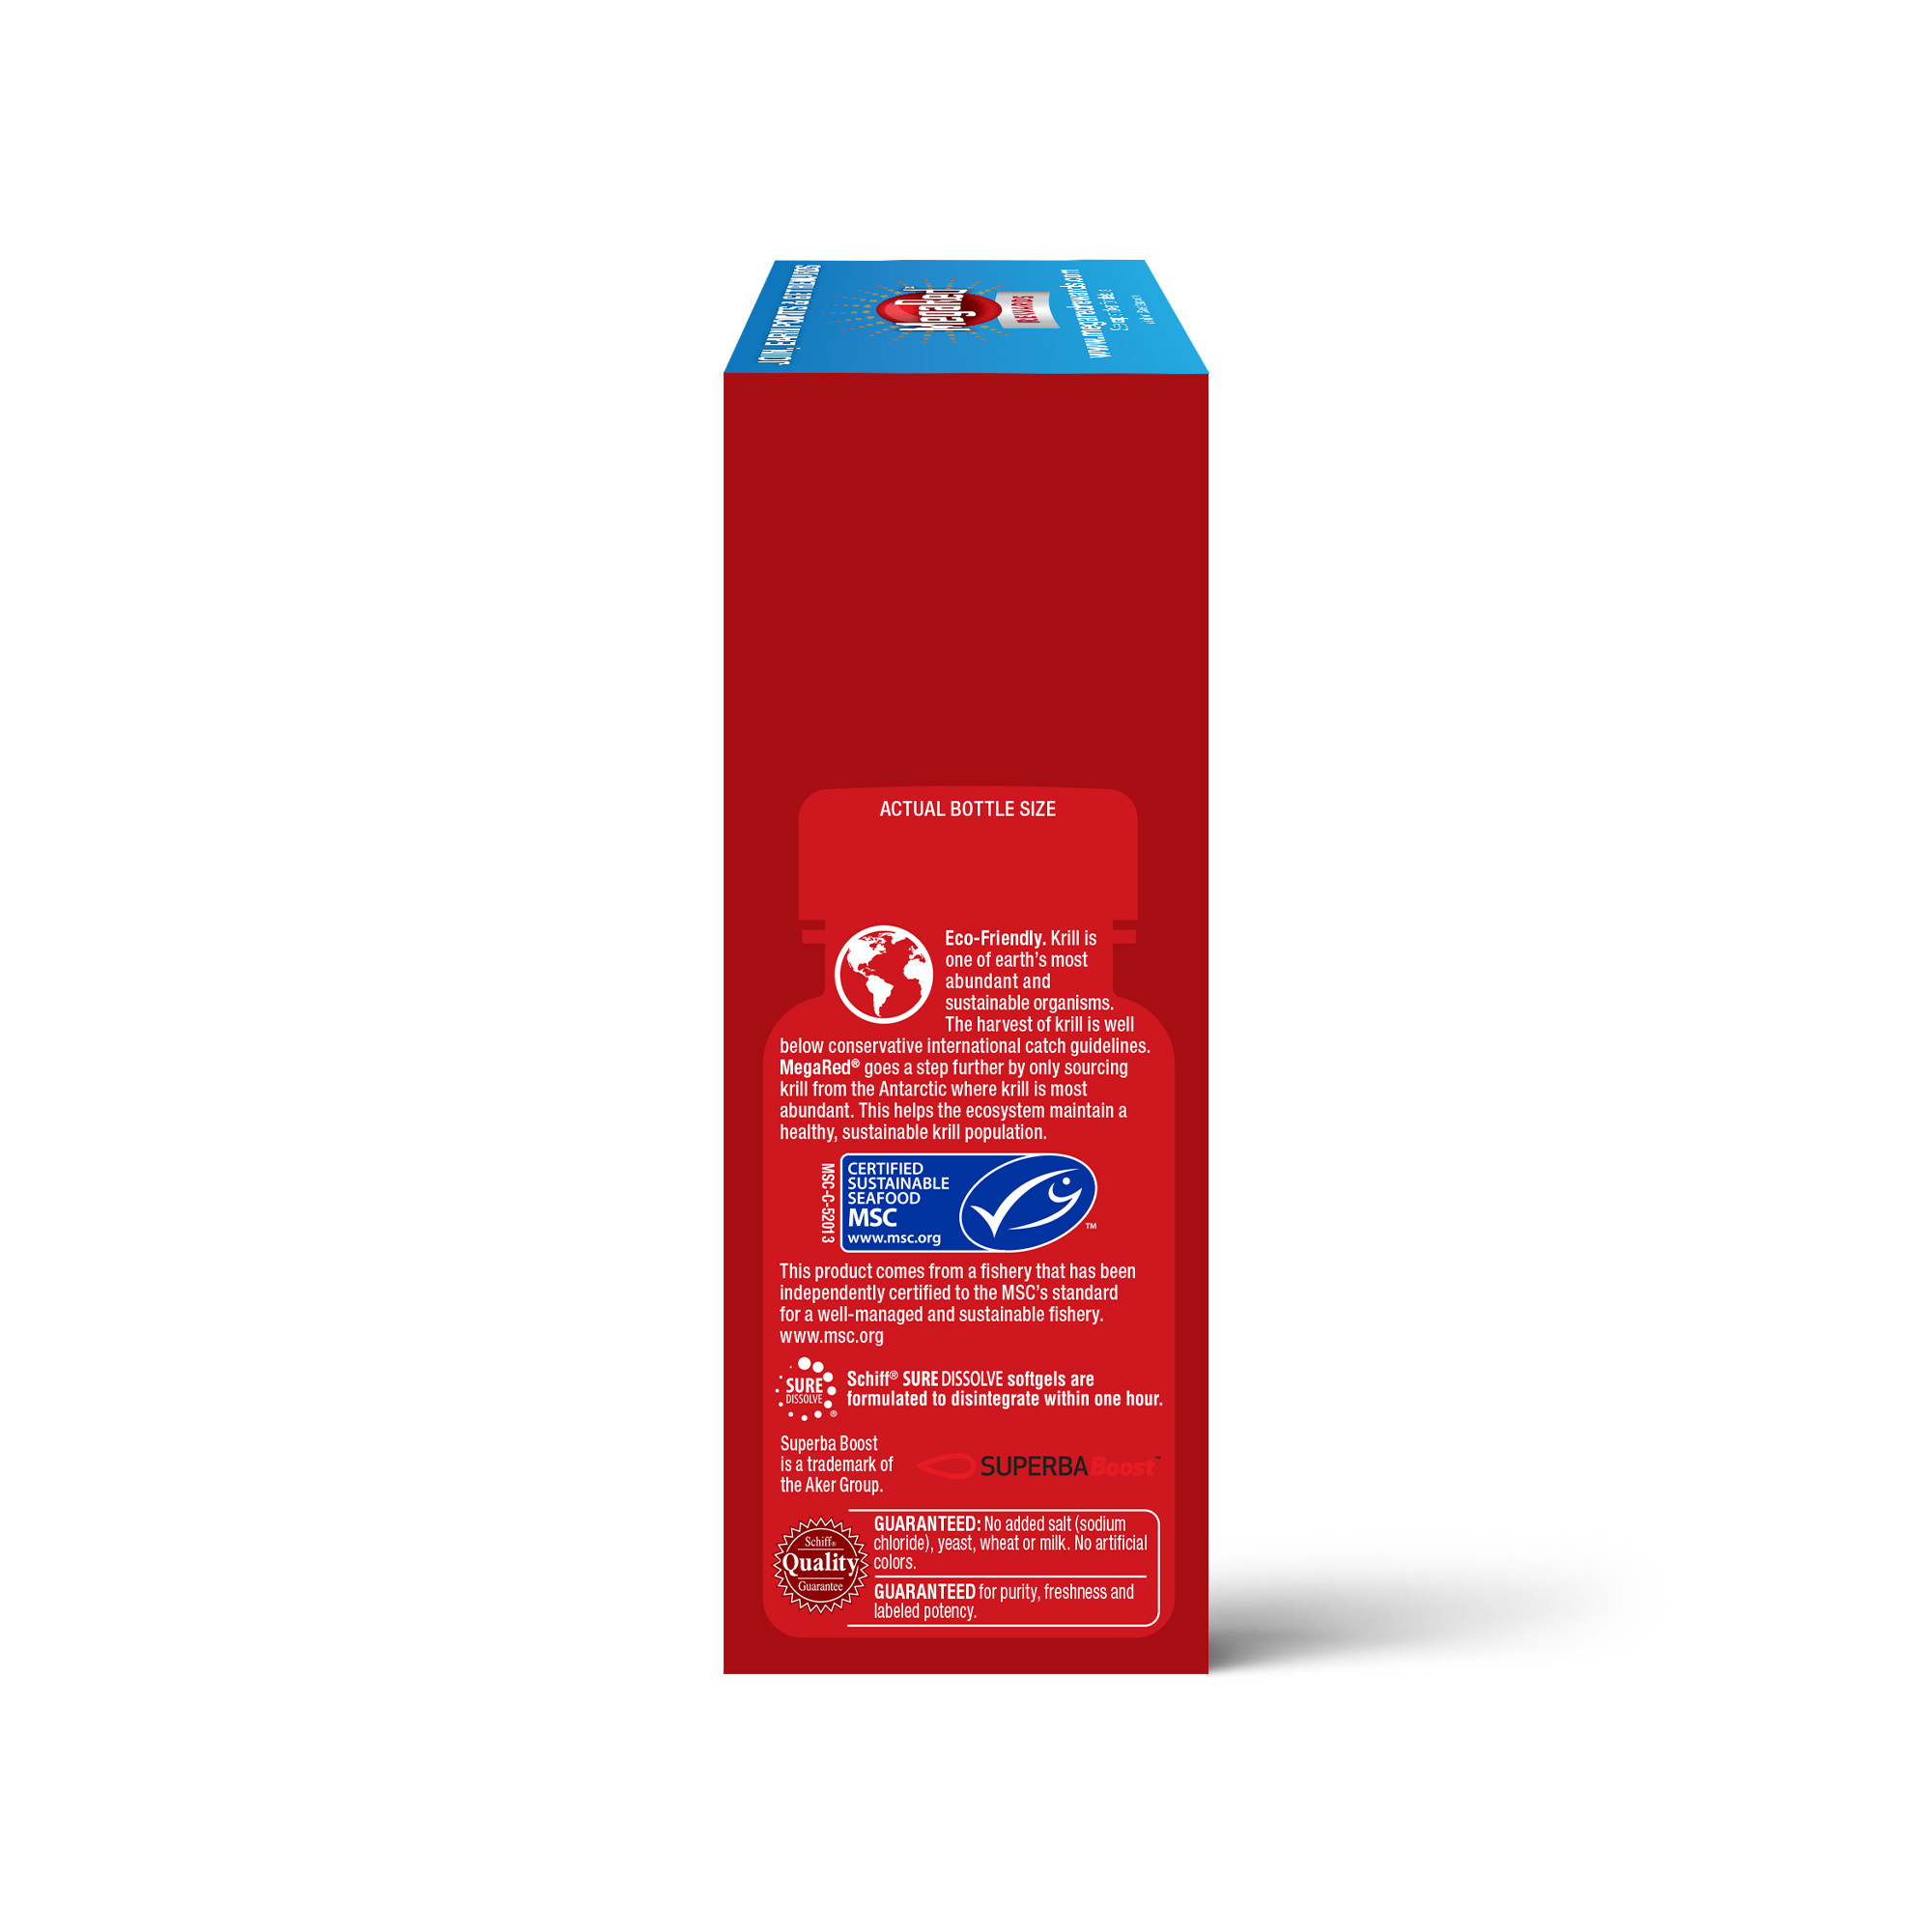 MegaRed 750mg Ultra Concentration Omega-3 Krill Oil, 40 Softgels - image 3 of 4